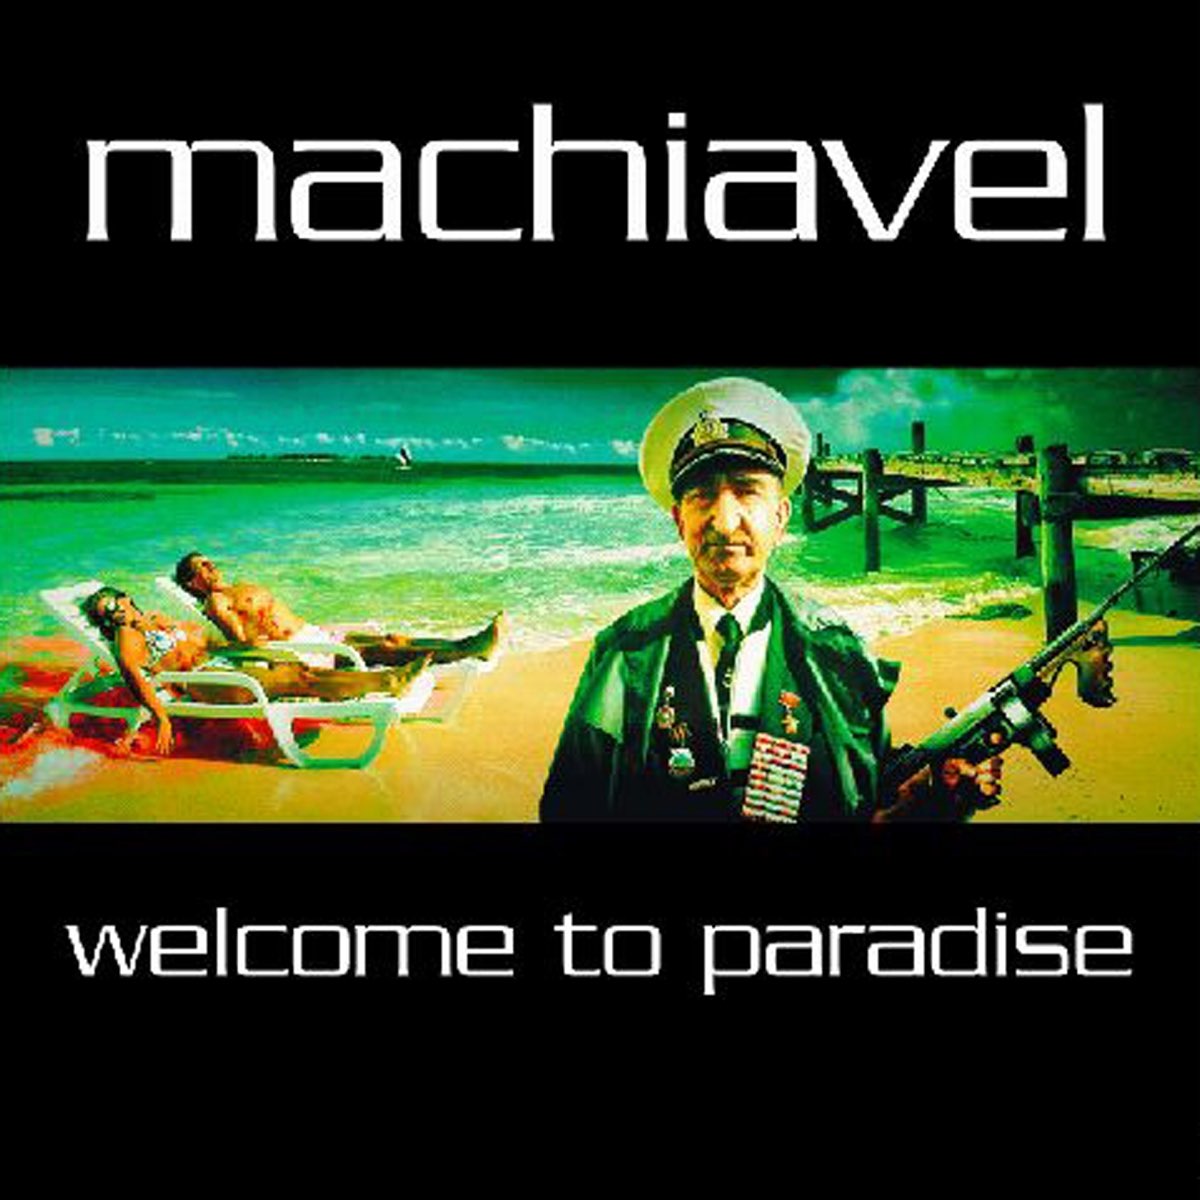 Welcome to paradise обзор. Welcome to Paradise. Welcome to Paradise игра. Хакон Welcome to Paradise. Machiavel Band.